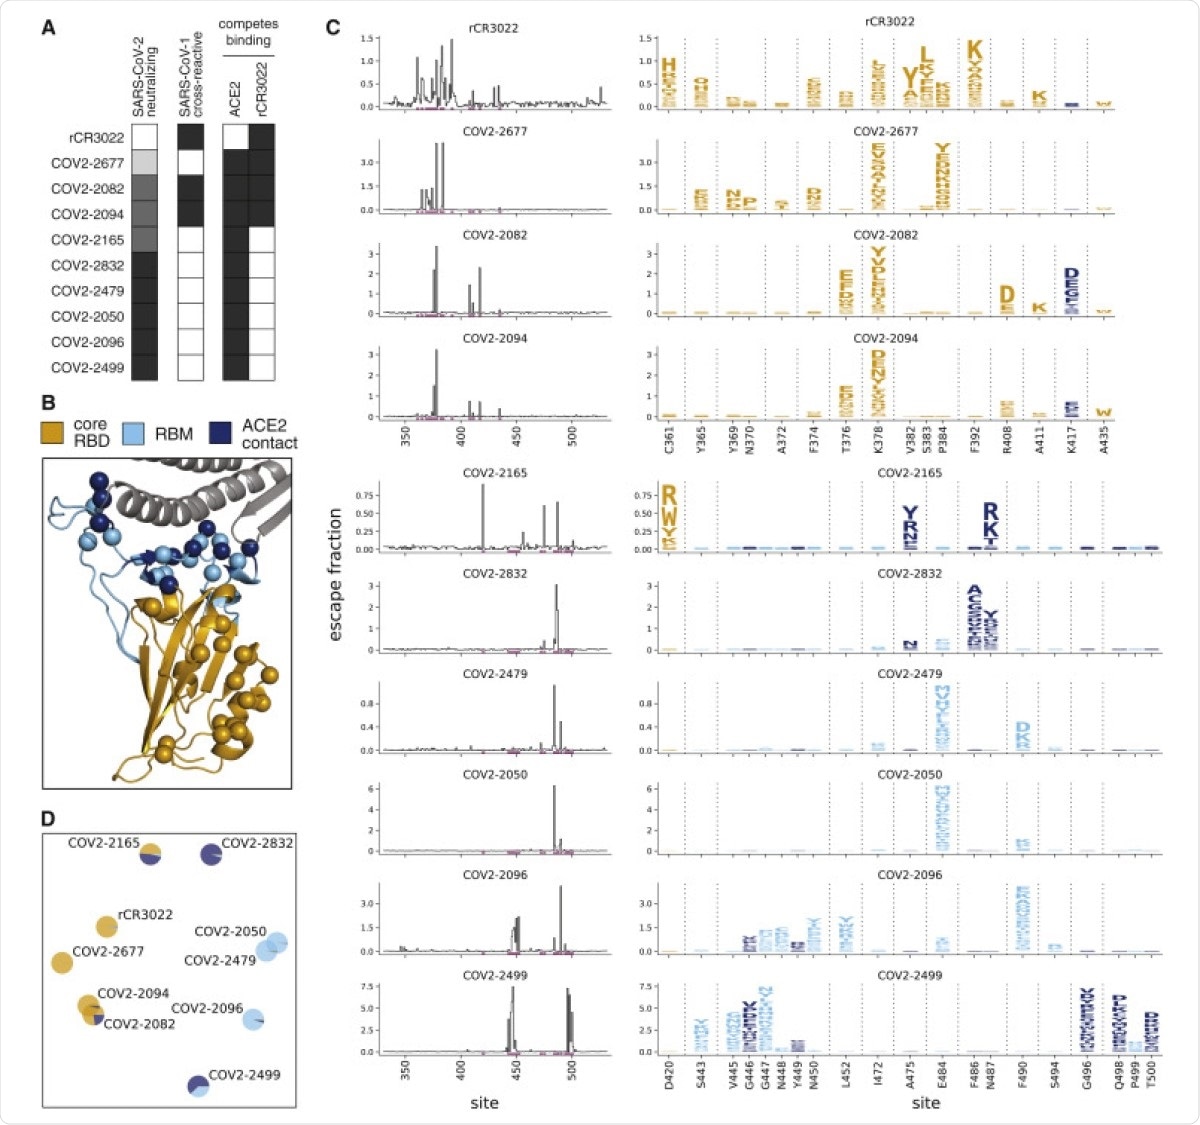 Complete Maps of Escape Mutations from 10 Human Monoclonal Antibodies (A) Properties of the antibodies as reported by Zost et al. (2020a). SARS-CoV-2 neutralization potency is represented as a gradient from black (most potent) to white (non-neutralizing). Antibodies that bind SARS-CoV-1 spike or compete with RBD binding to ACE2 or rCR3022 are indicated in black. (B) Structure of the SARS-CoV-2 RBD (PDB: 6M0J; Lan et al., 2020), with residues colored by whether they are in the core RBD distal from ACE2 (orange), in the receptor-binding motif (RBM, light blue), or in direct contact with ACE2 (dark blue). ACE2 is in gray. RBD sites where mutations escape antibodies are indicated with spheres. (C) Maps of escape mutations from each antibody. The line plots show the total escape at each RBD site (sum of escape fractions of all mutations at that site). Sites with strong escape mutations (indicated by purple at bottom of the line plots) are shown in the logo plots. Logo plots are colored by RBD region as in (B). Different sites are shown for the rCR3022-competing antibodies (top four) and all other antibodies (bottom six). For interactive escape maps, see https://jbloomlab.github.io/SARS-CoV-2-RBD_MAP_Crowe_antibodies. (D) Multidimensional scaling projection of the escape mutant maps, with antibodies having similar escape mutations drawn close together. Each antibody is shown with a pie chart that uses the color scale in (B) to indicate the RBD regions where it selects escape mutations. See also Figures S1 and S2 and Table S1.